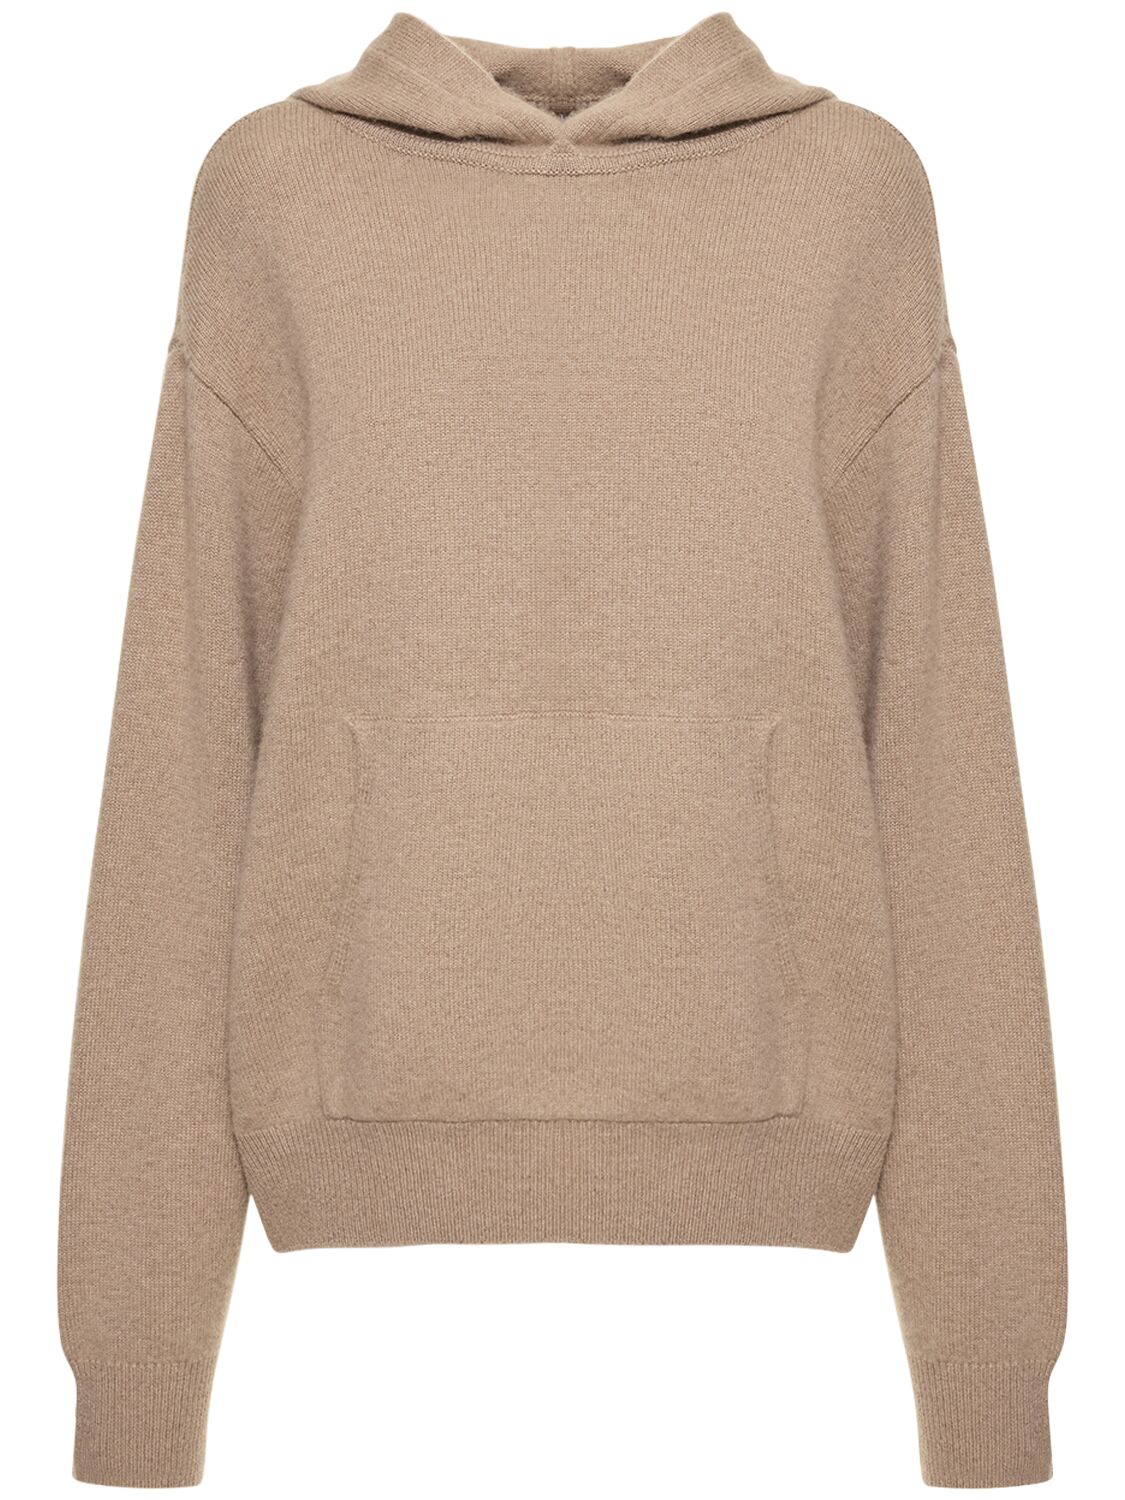 Interior The Lindsey Hoodie Cashmere Sweater In Oat